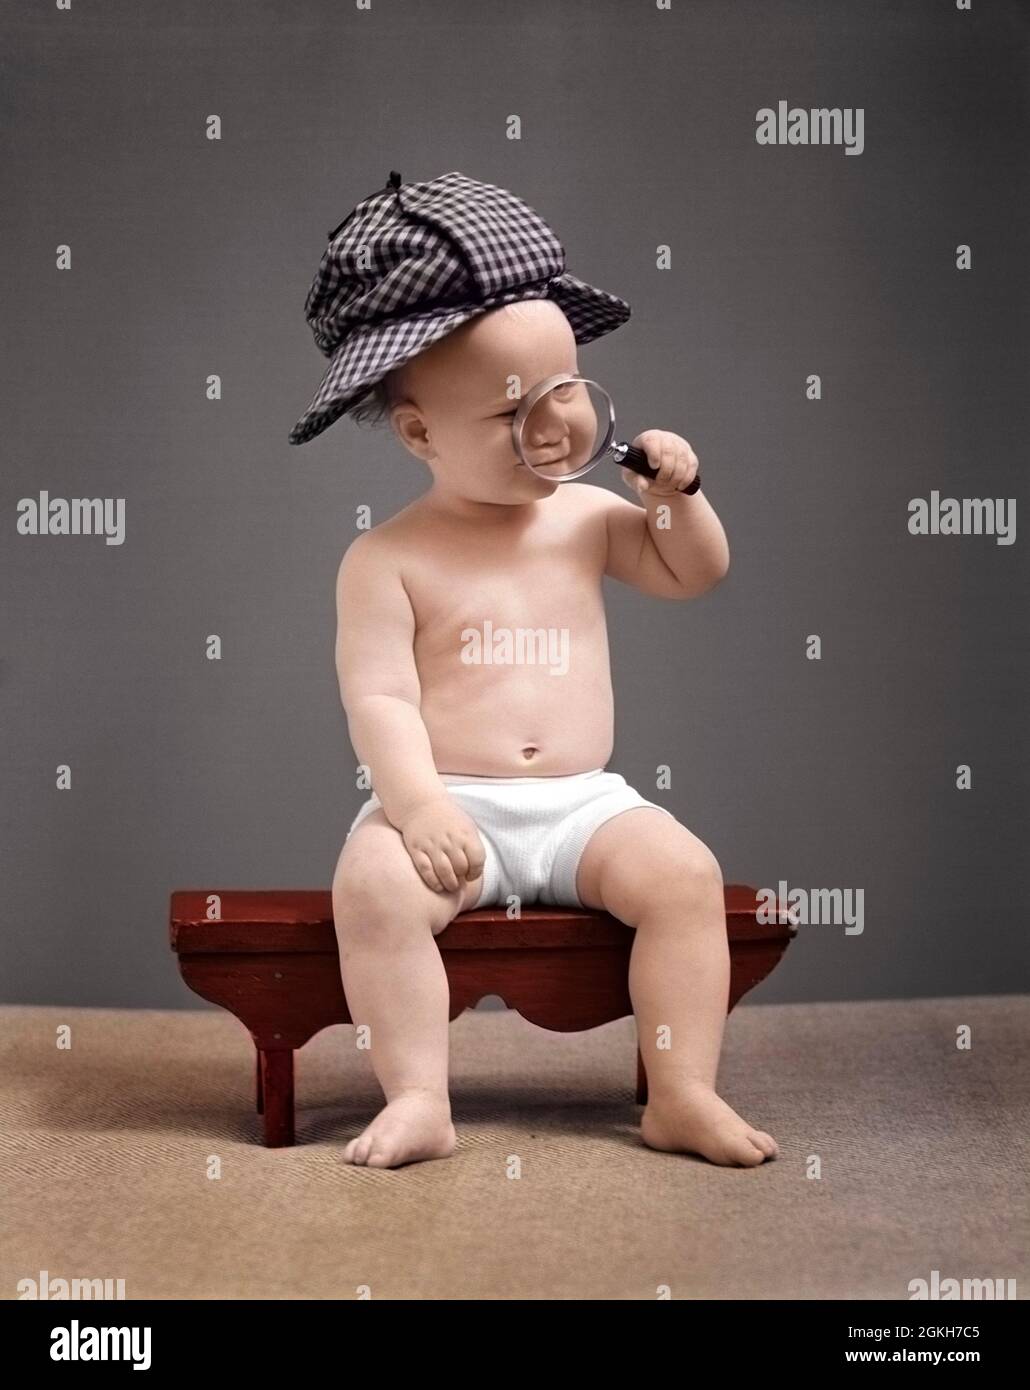 1940s BABY SHERLOCK HOLMES IN DIAPER SITTING ON BENCH WEARING DEER STALKER HAT LOOKING THROUGH MAGNIFYING GLASS - b17532c HAR001 HARS COPY SPACE FULL-LENGTH MALES DIAPER B&W ADVENTURE DISCOVERY KNOWLEDGE DIAPERS DETECTIVE OCCUPATIONS INVESTIGATOR SHERLOCK HOLMES STYLISH DEERSTALKER BABY BOY STALKER JUVENILES SOLUTIONS YOUNGSTER BLACK AND WHITE CAUCASIAN ETHNICITY DEER HAR001 OLD FASHIONED Stock Photo